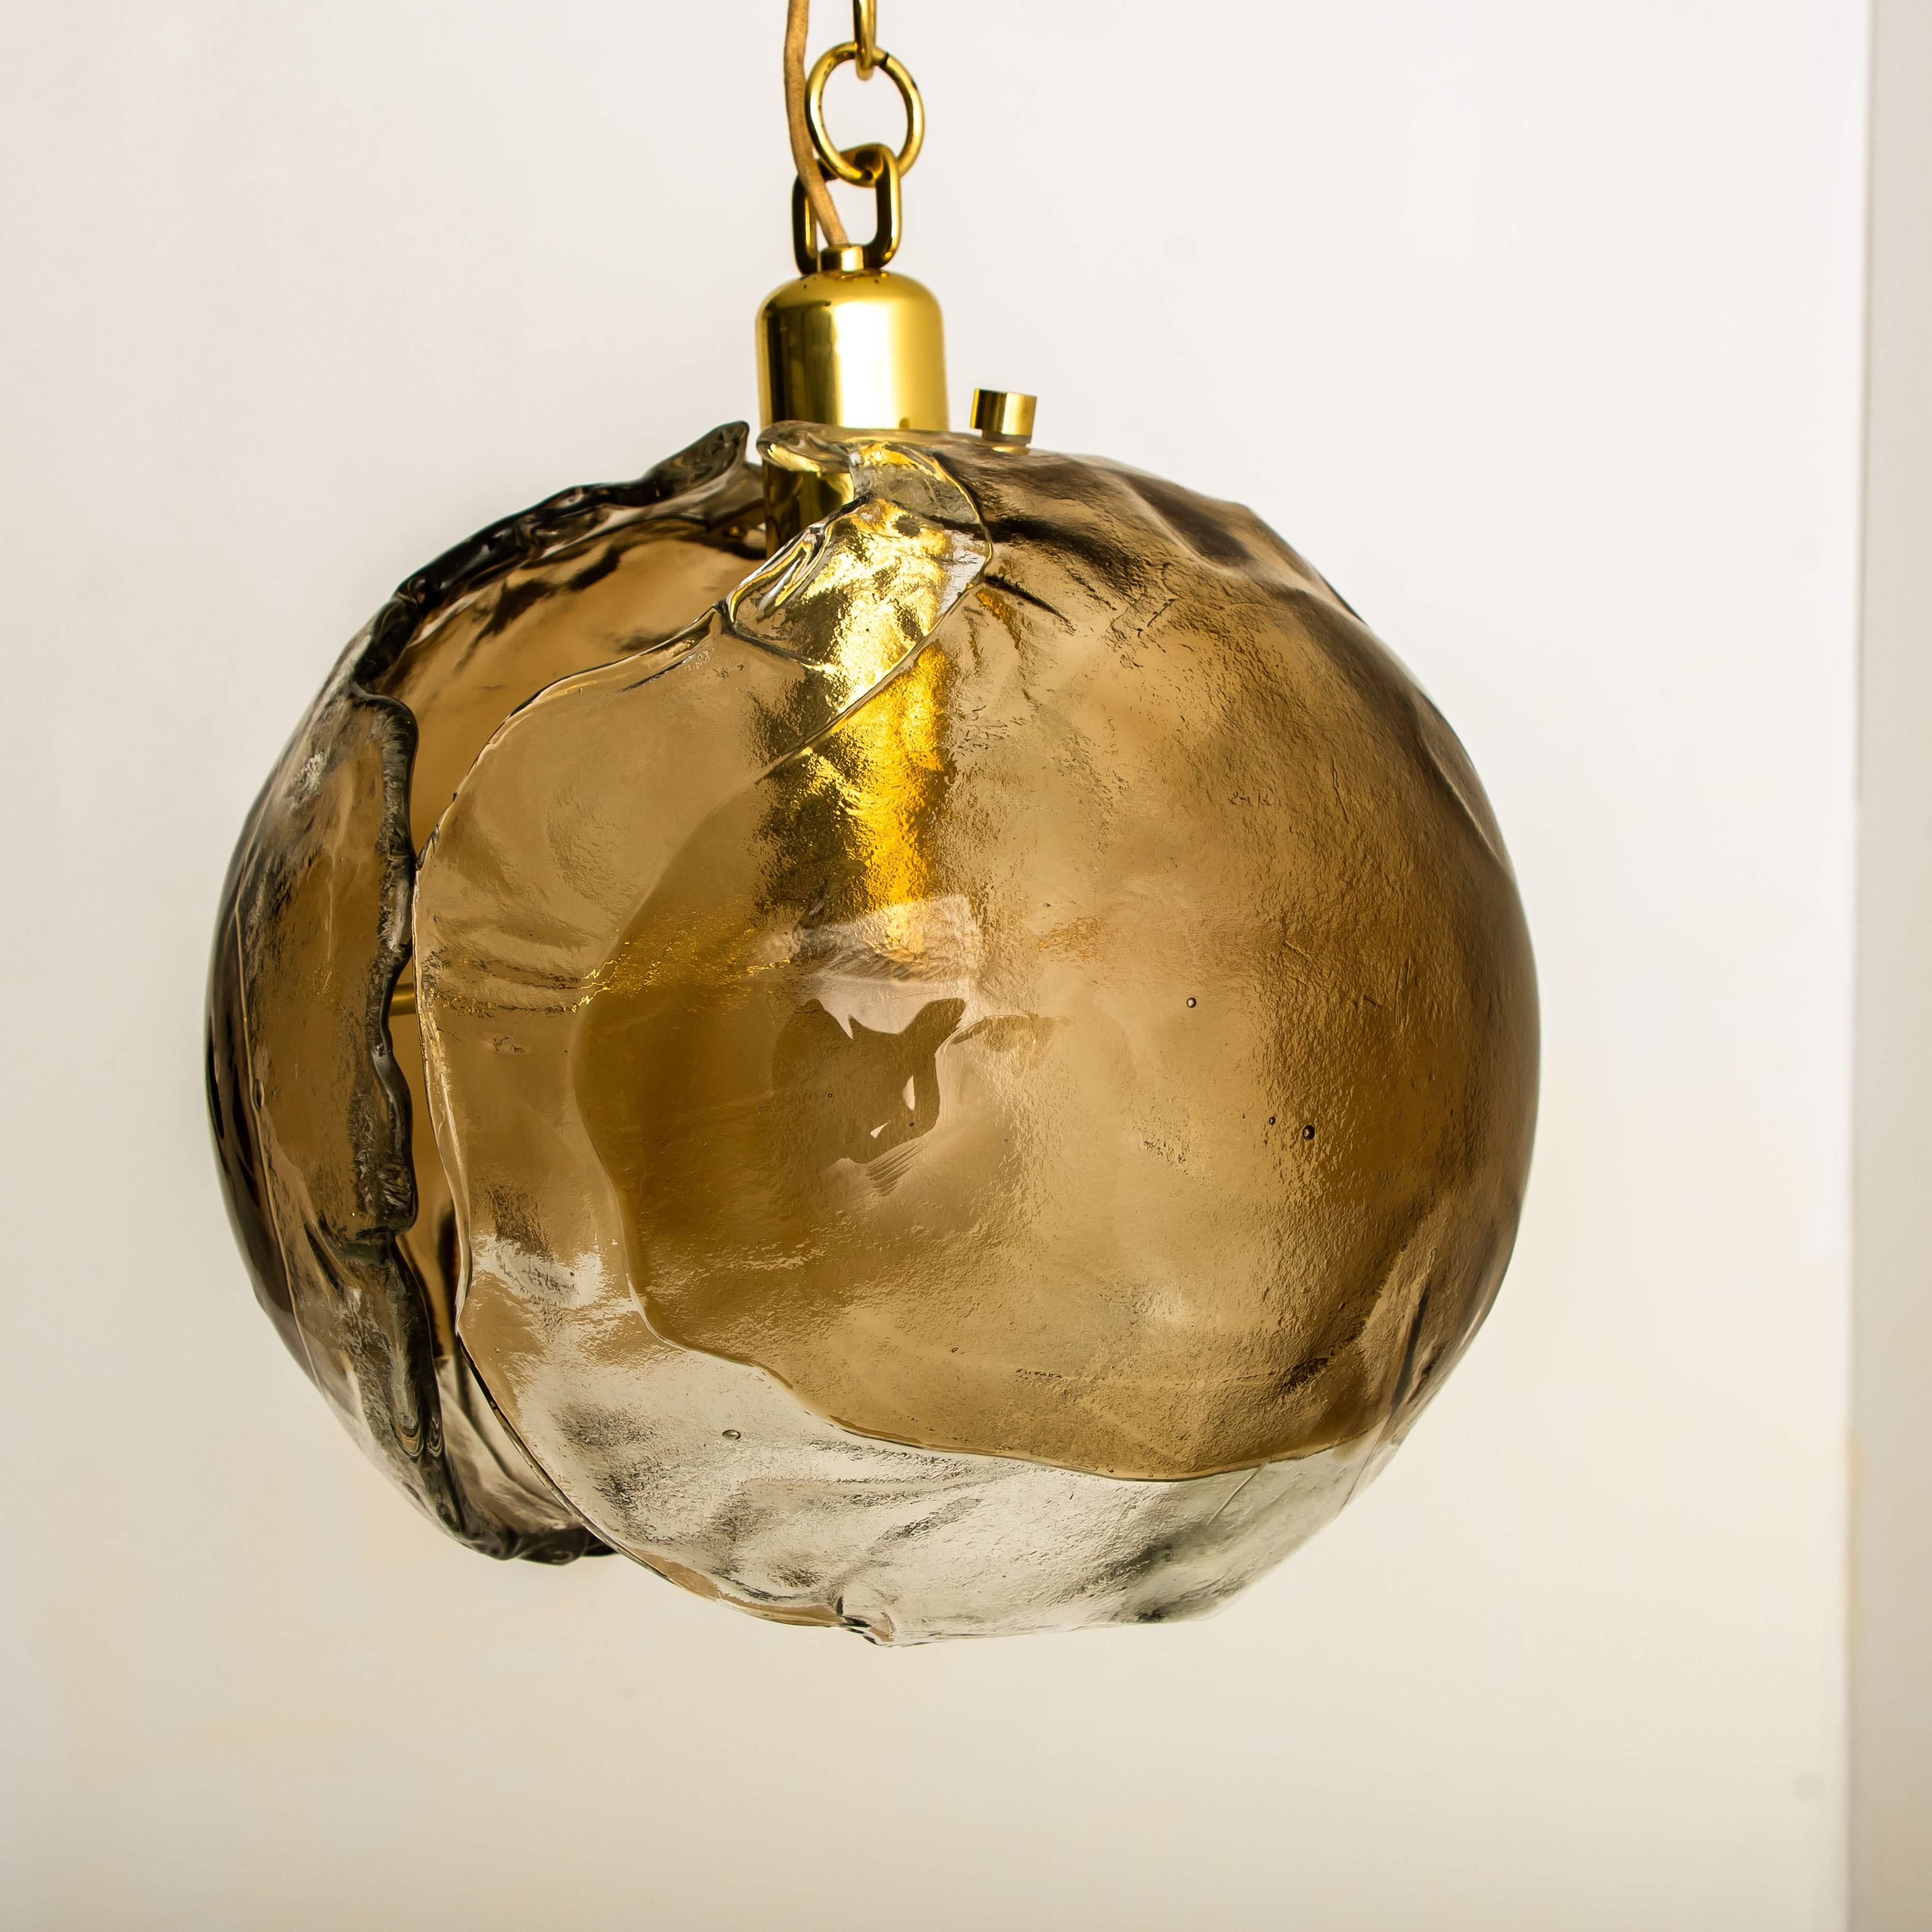 1 of the 3 Kalmar Chandelier Pendant Lights, Smoked Glass and Brass, 1970s For Sale 8